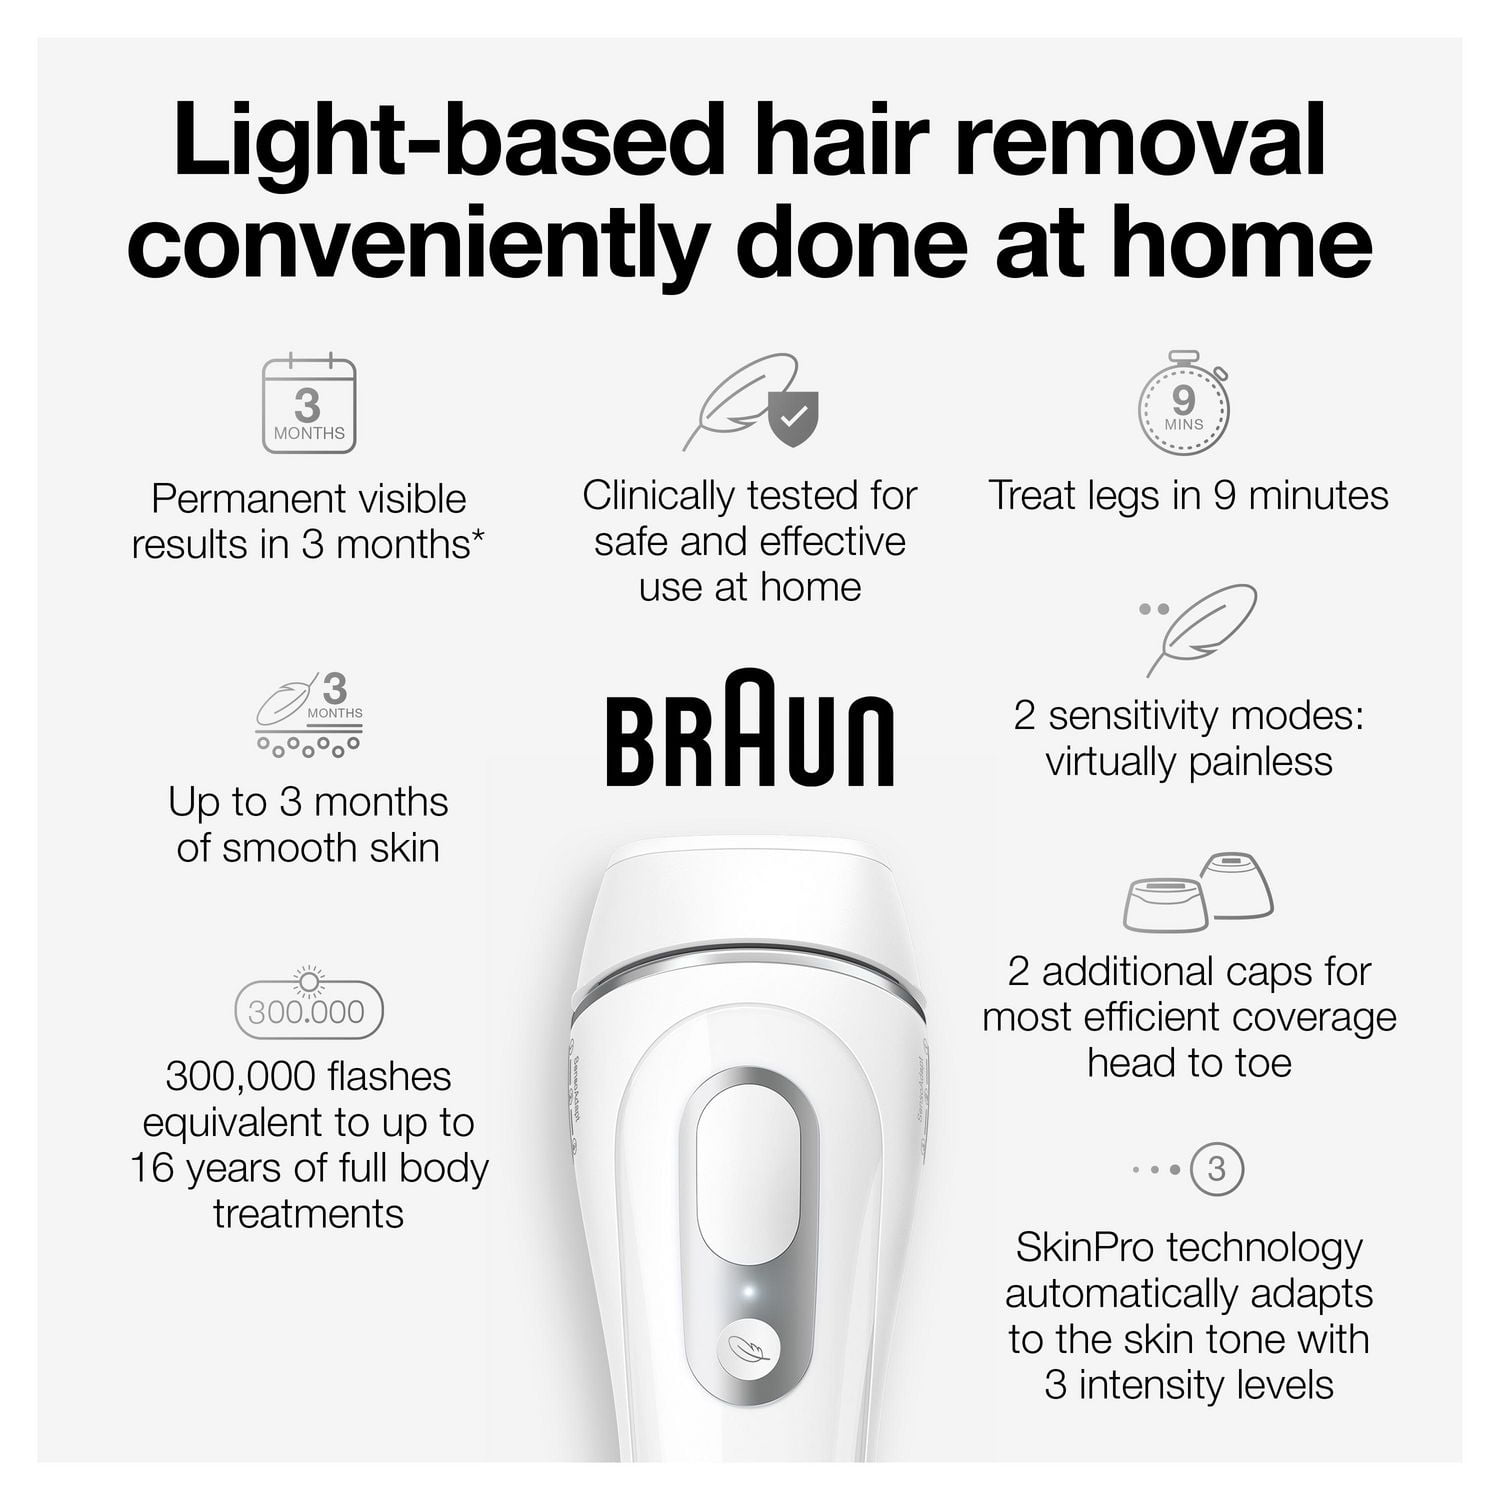 Braun Silk·expert Pro 3 – PL3221 IPL for Women and Men, At-Home Hair  Removal System 